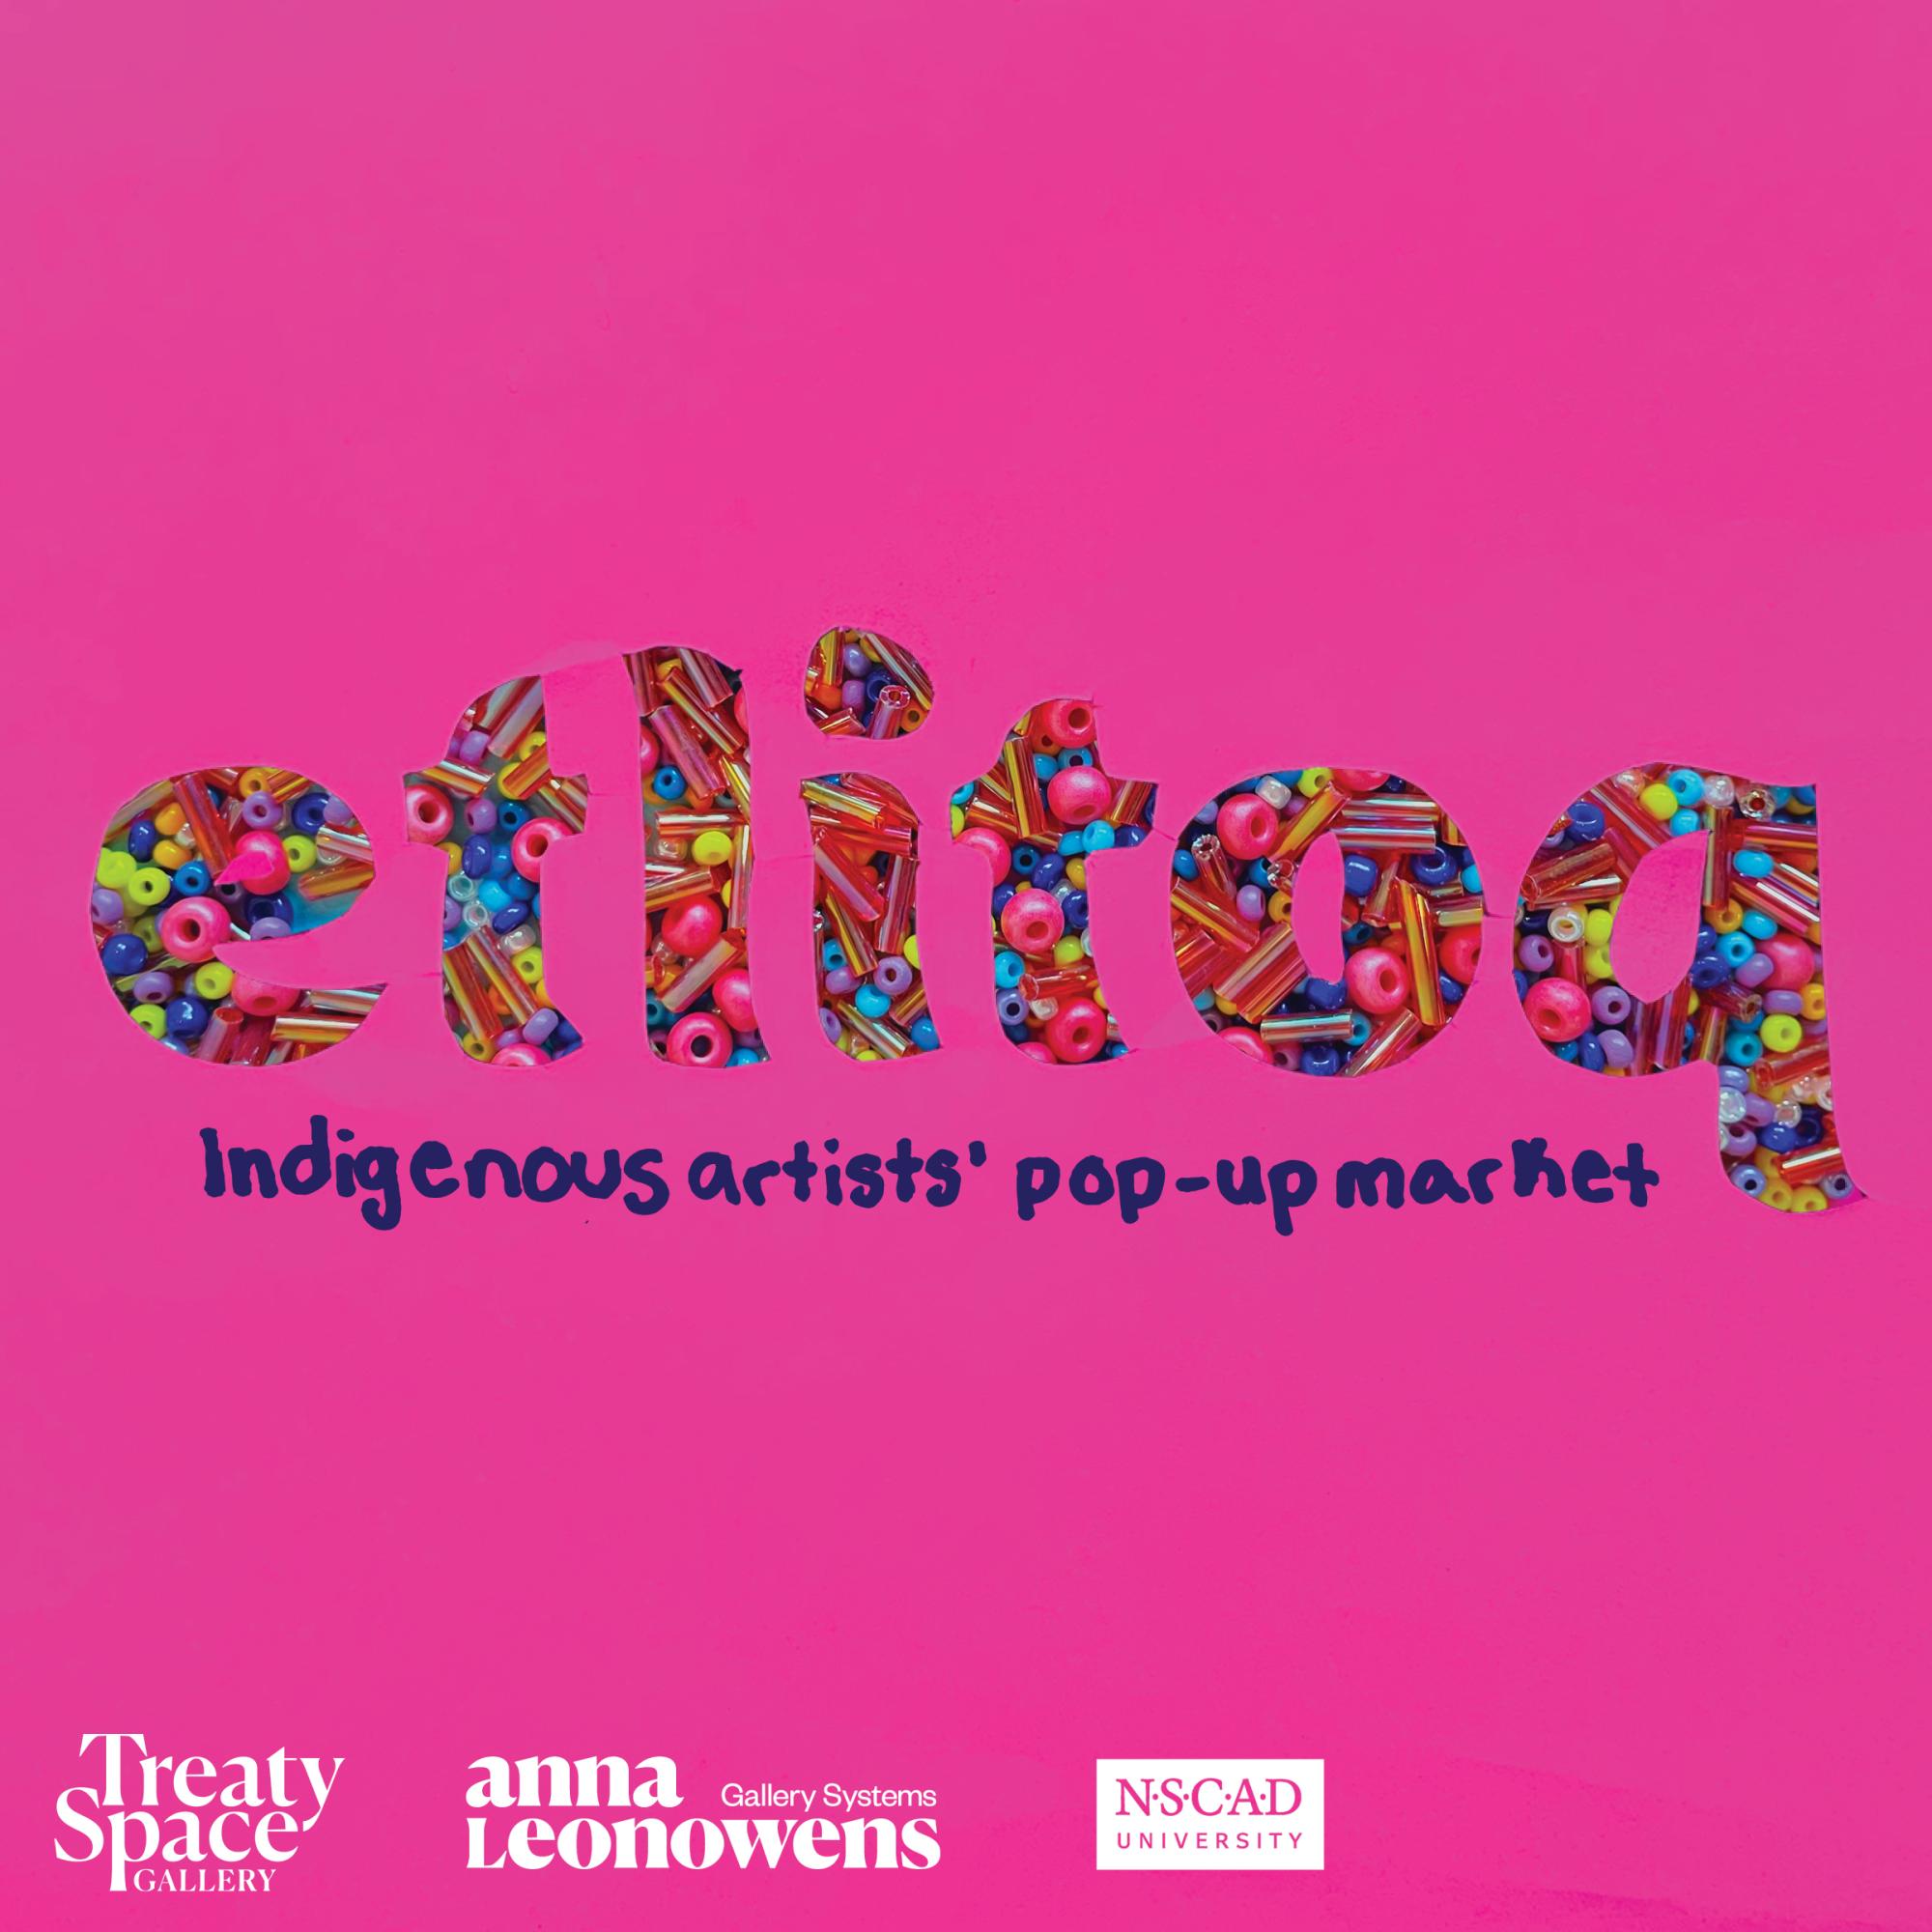 [ID: "Pink construction paper with the word 'Etlitoq' cut out of it, with colourful beads in the background, and 'Indigenous artists' pop-up market' hand written in blue marker underneath." 